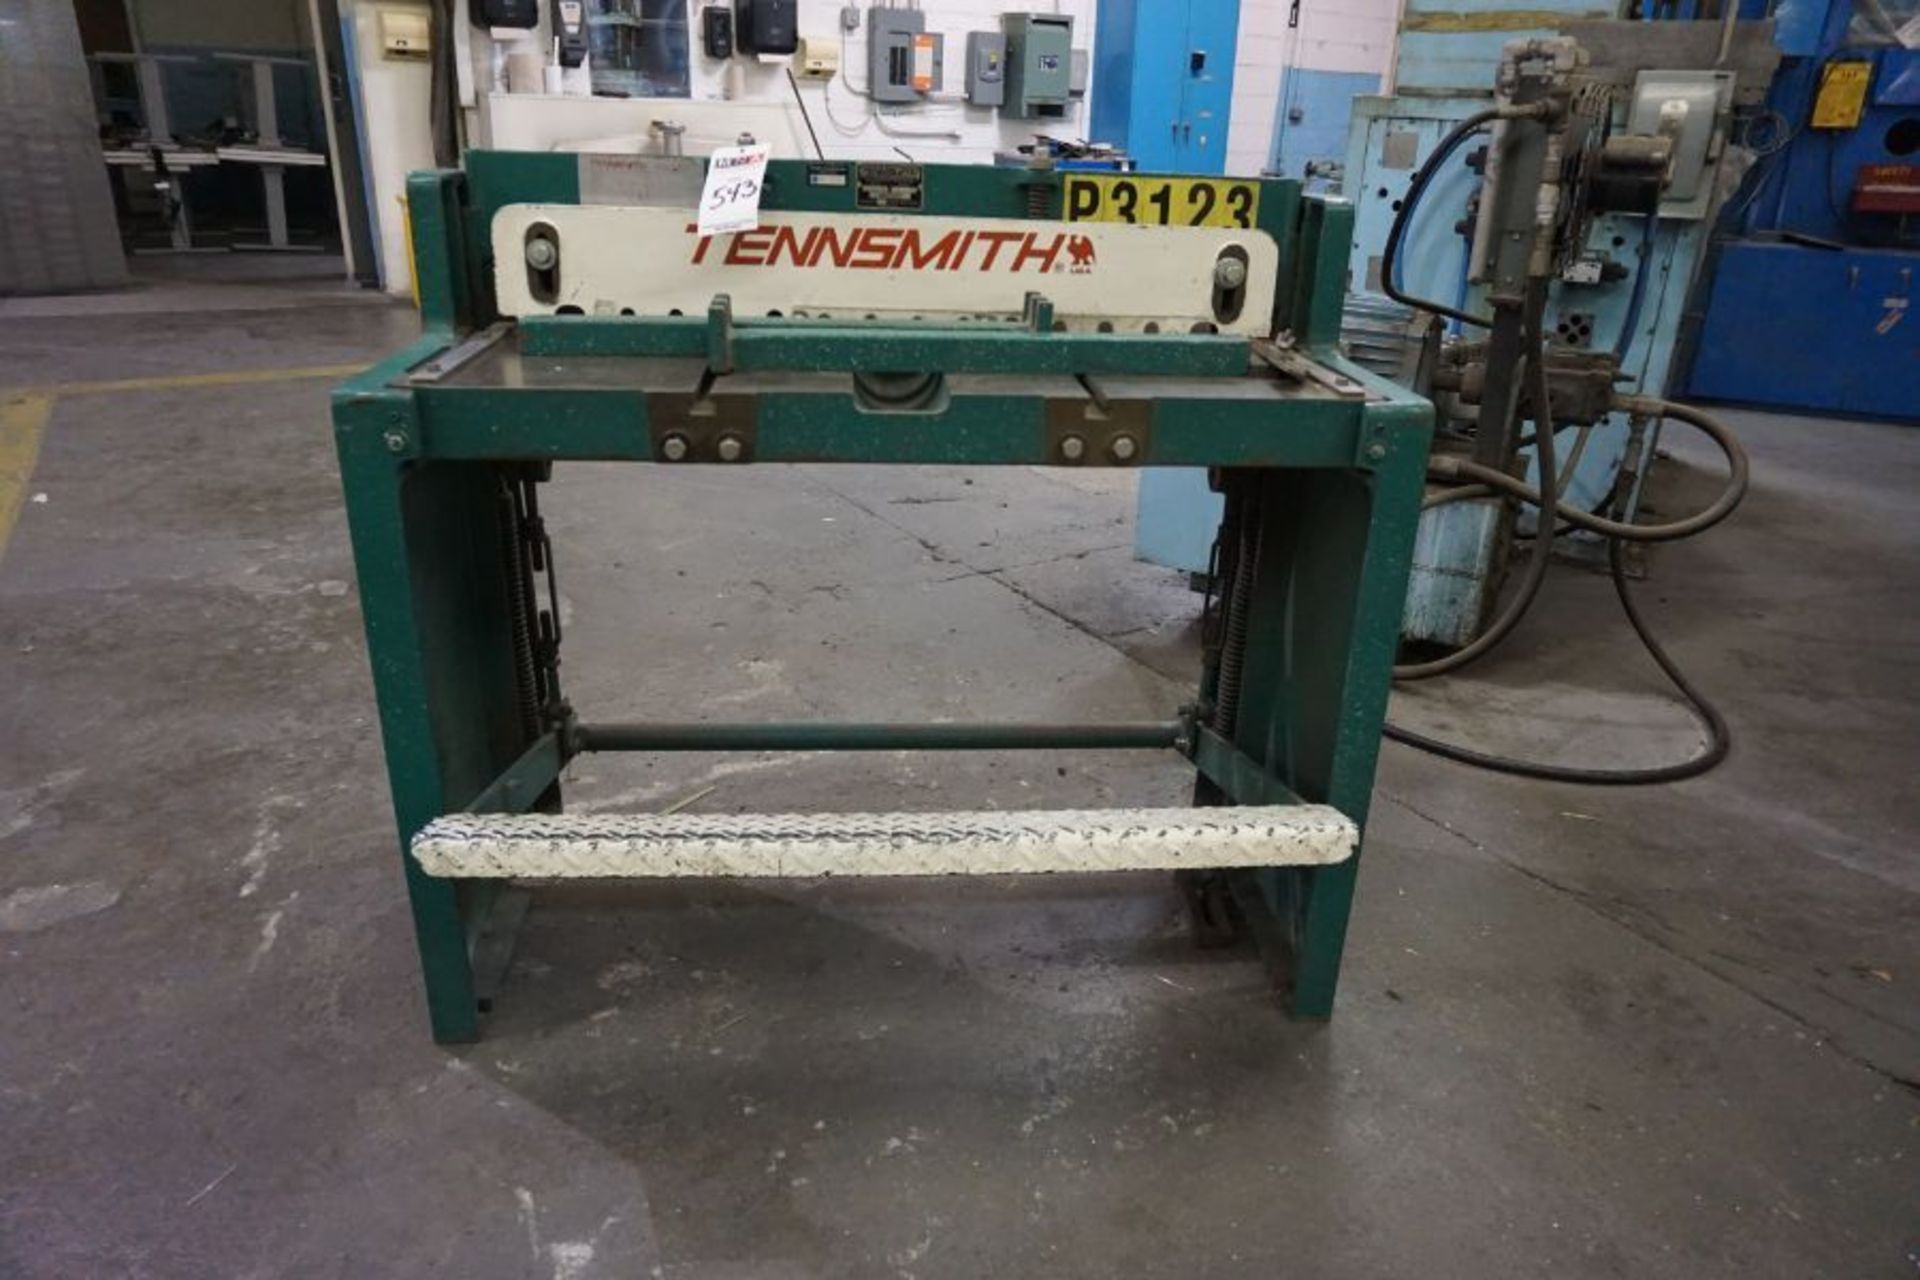 36" Tennsmith T3616 Foot Shear, s/n 17009 *Auctioned from Edgerton, KS*